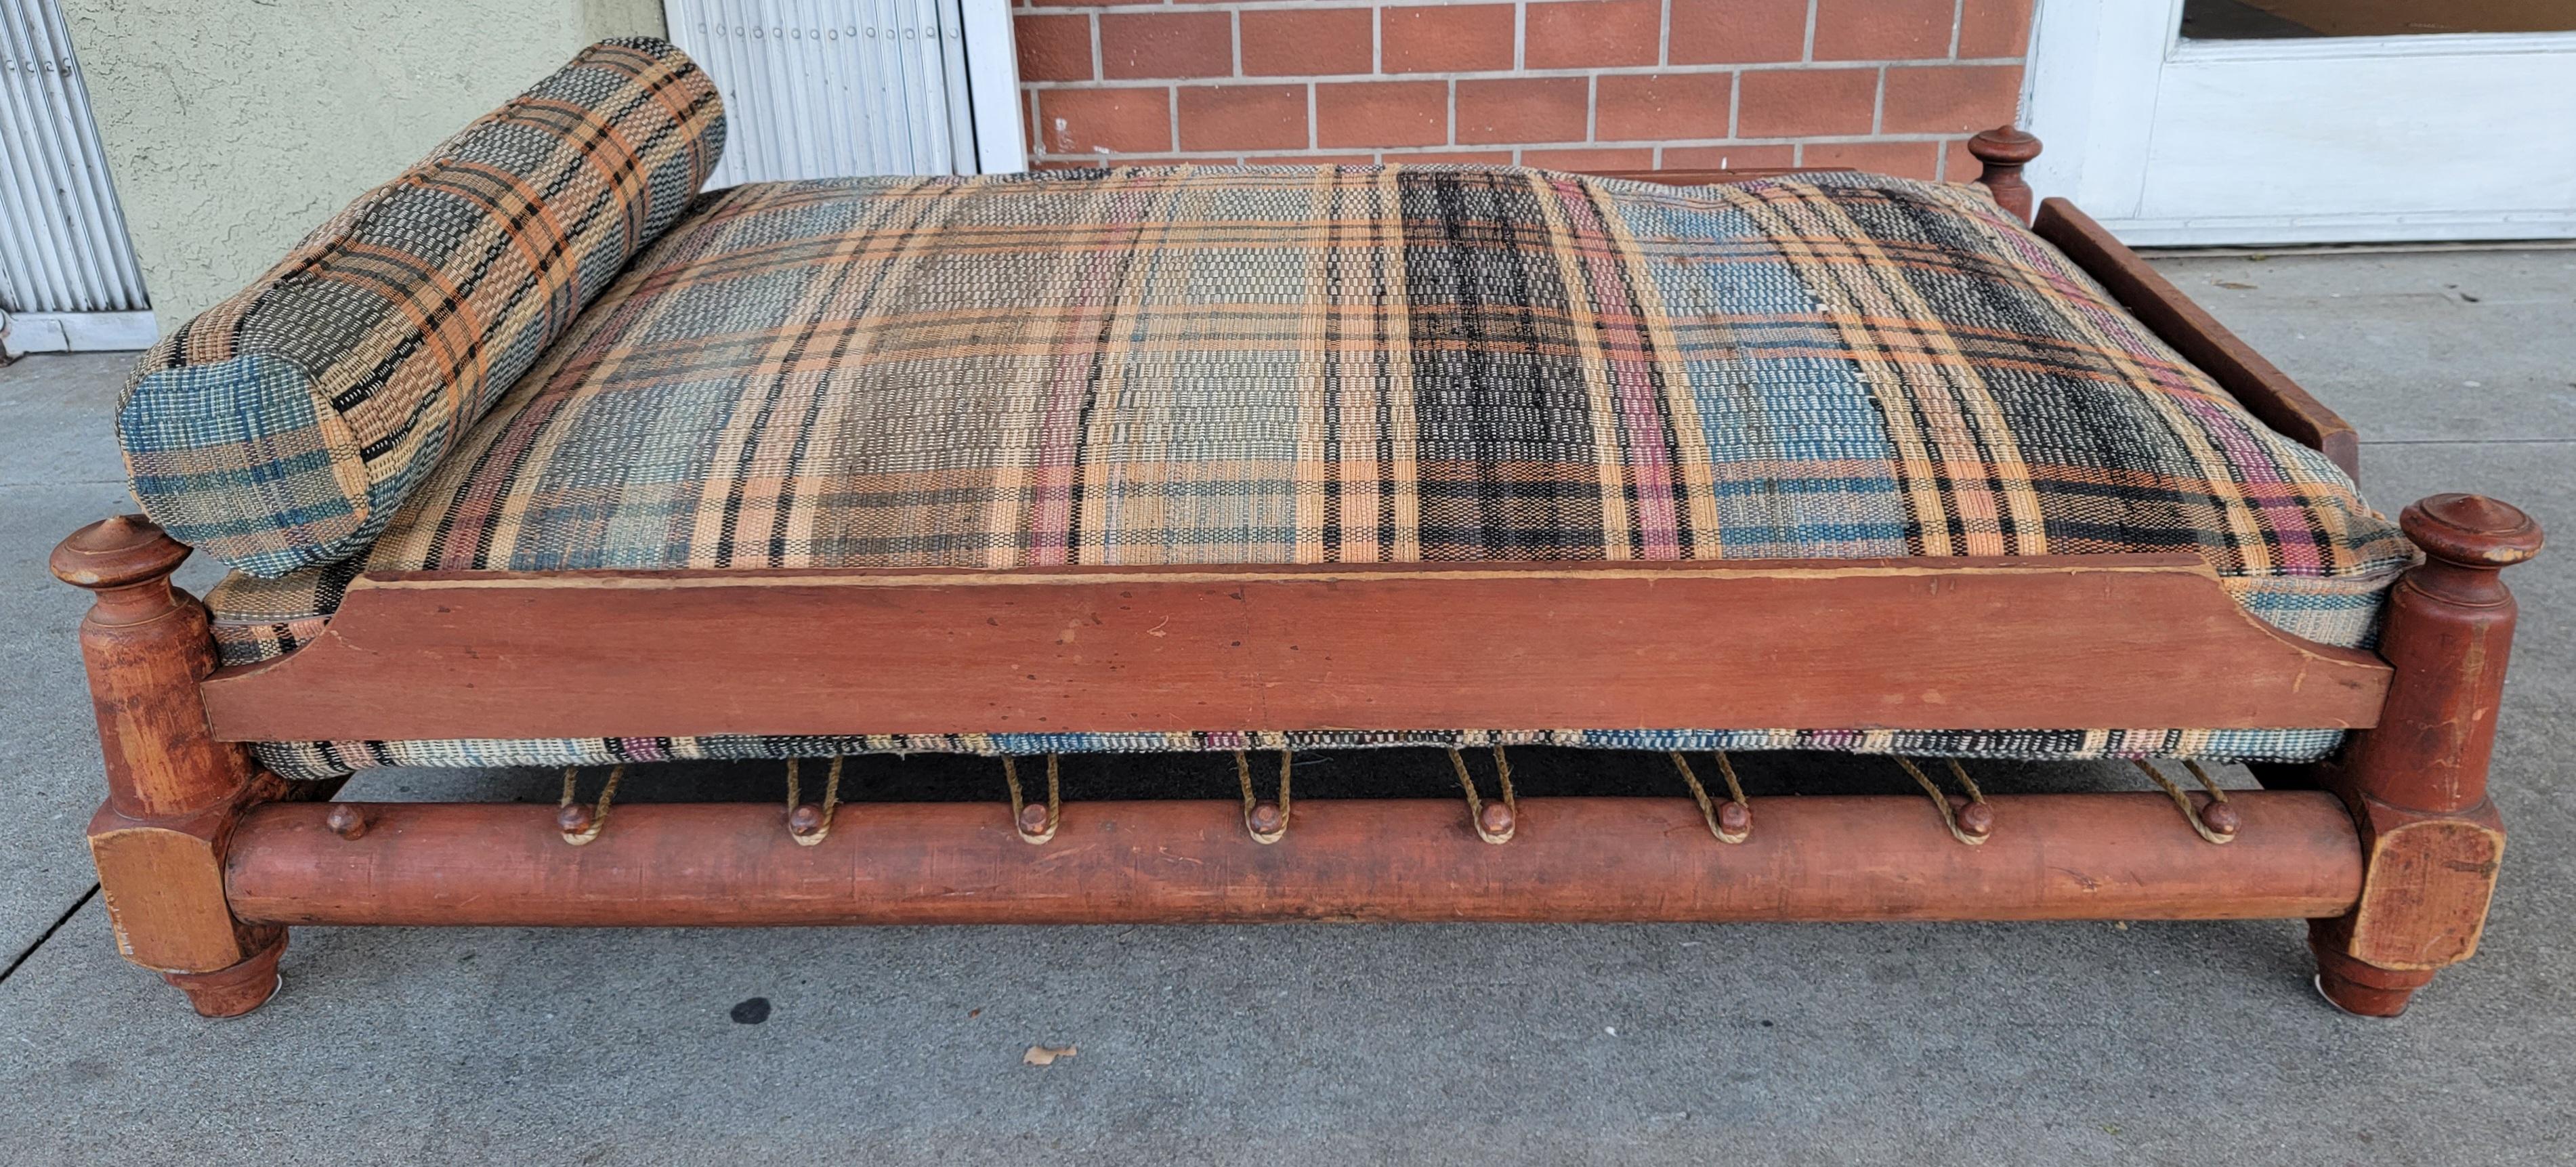 19th C Original Salmon Painted Trendle Bed W/ Rag Rug Cushion In Good Condition For Sale In Los Angeles, CA